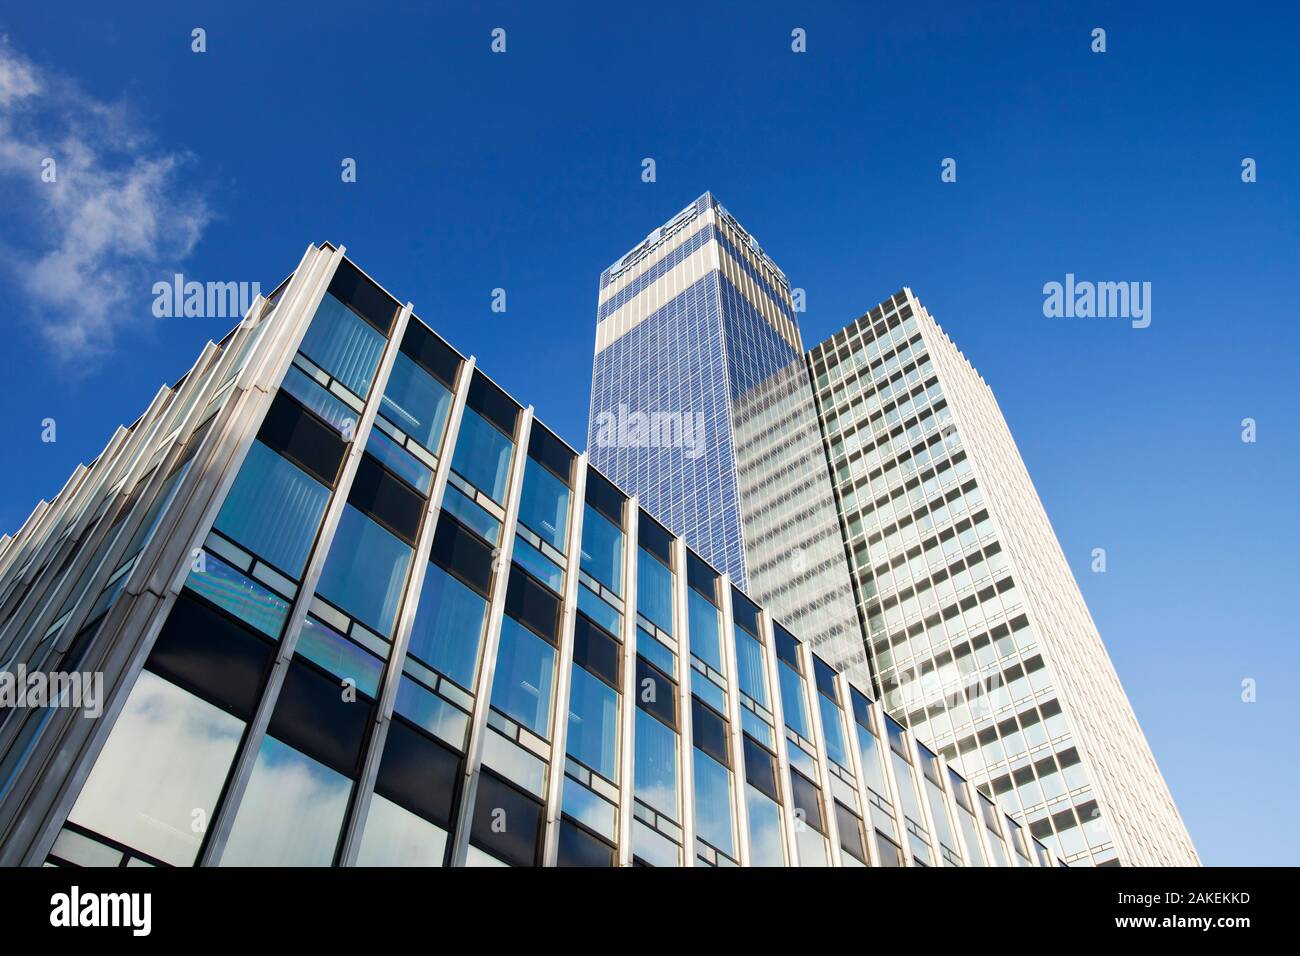 Cooperative CIS Tower in Manchester, England, UK. The tower has been covered in 7000 Solar panels and generates enough green electricity to power 55 homes, or 180, 000 Kw hours per year. November 2011 Stock Photo